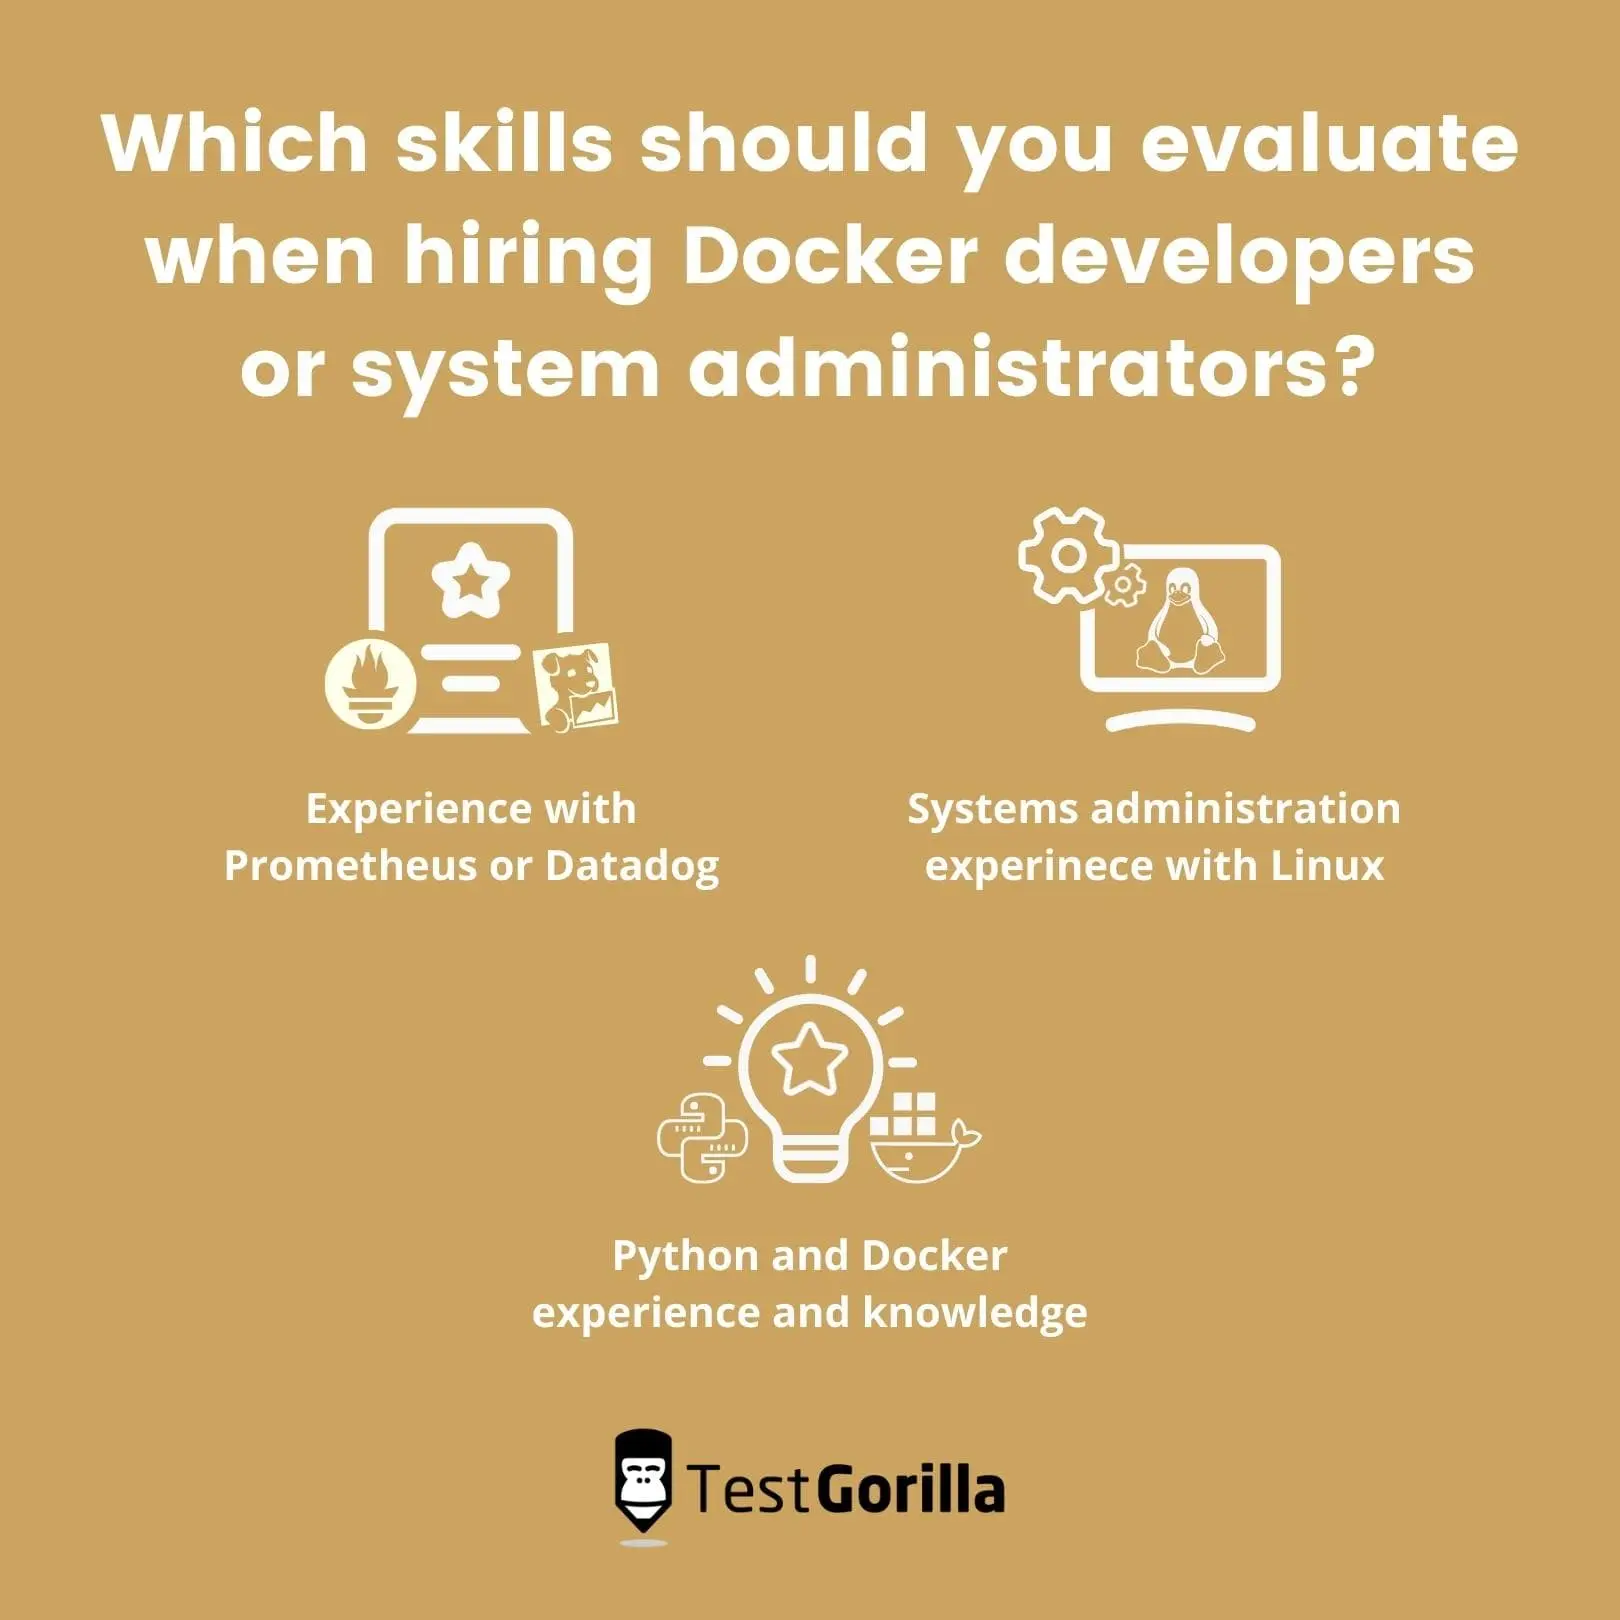 skills to evaluate when hiring Docker developers or system administrators